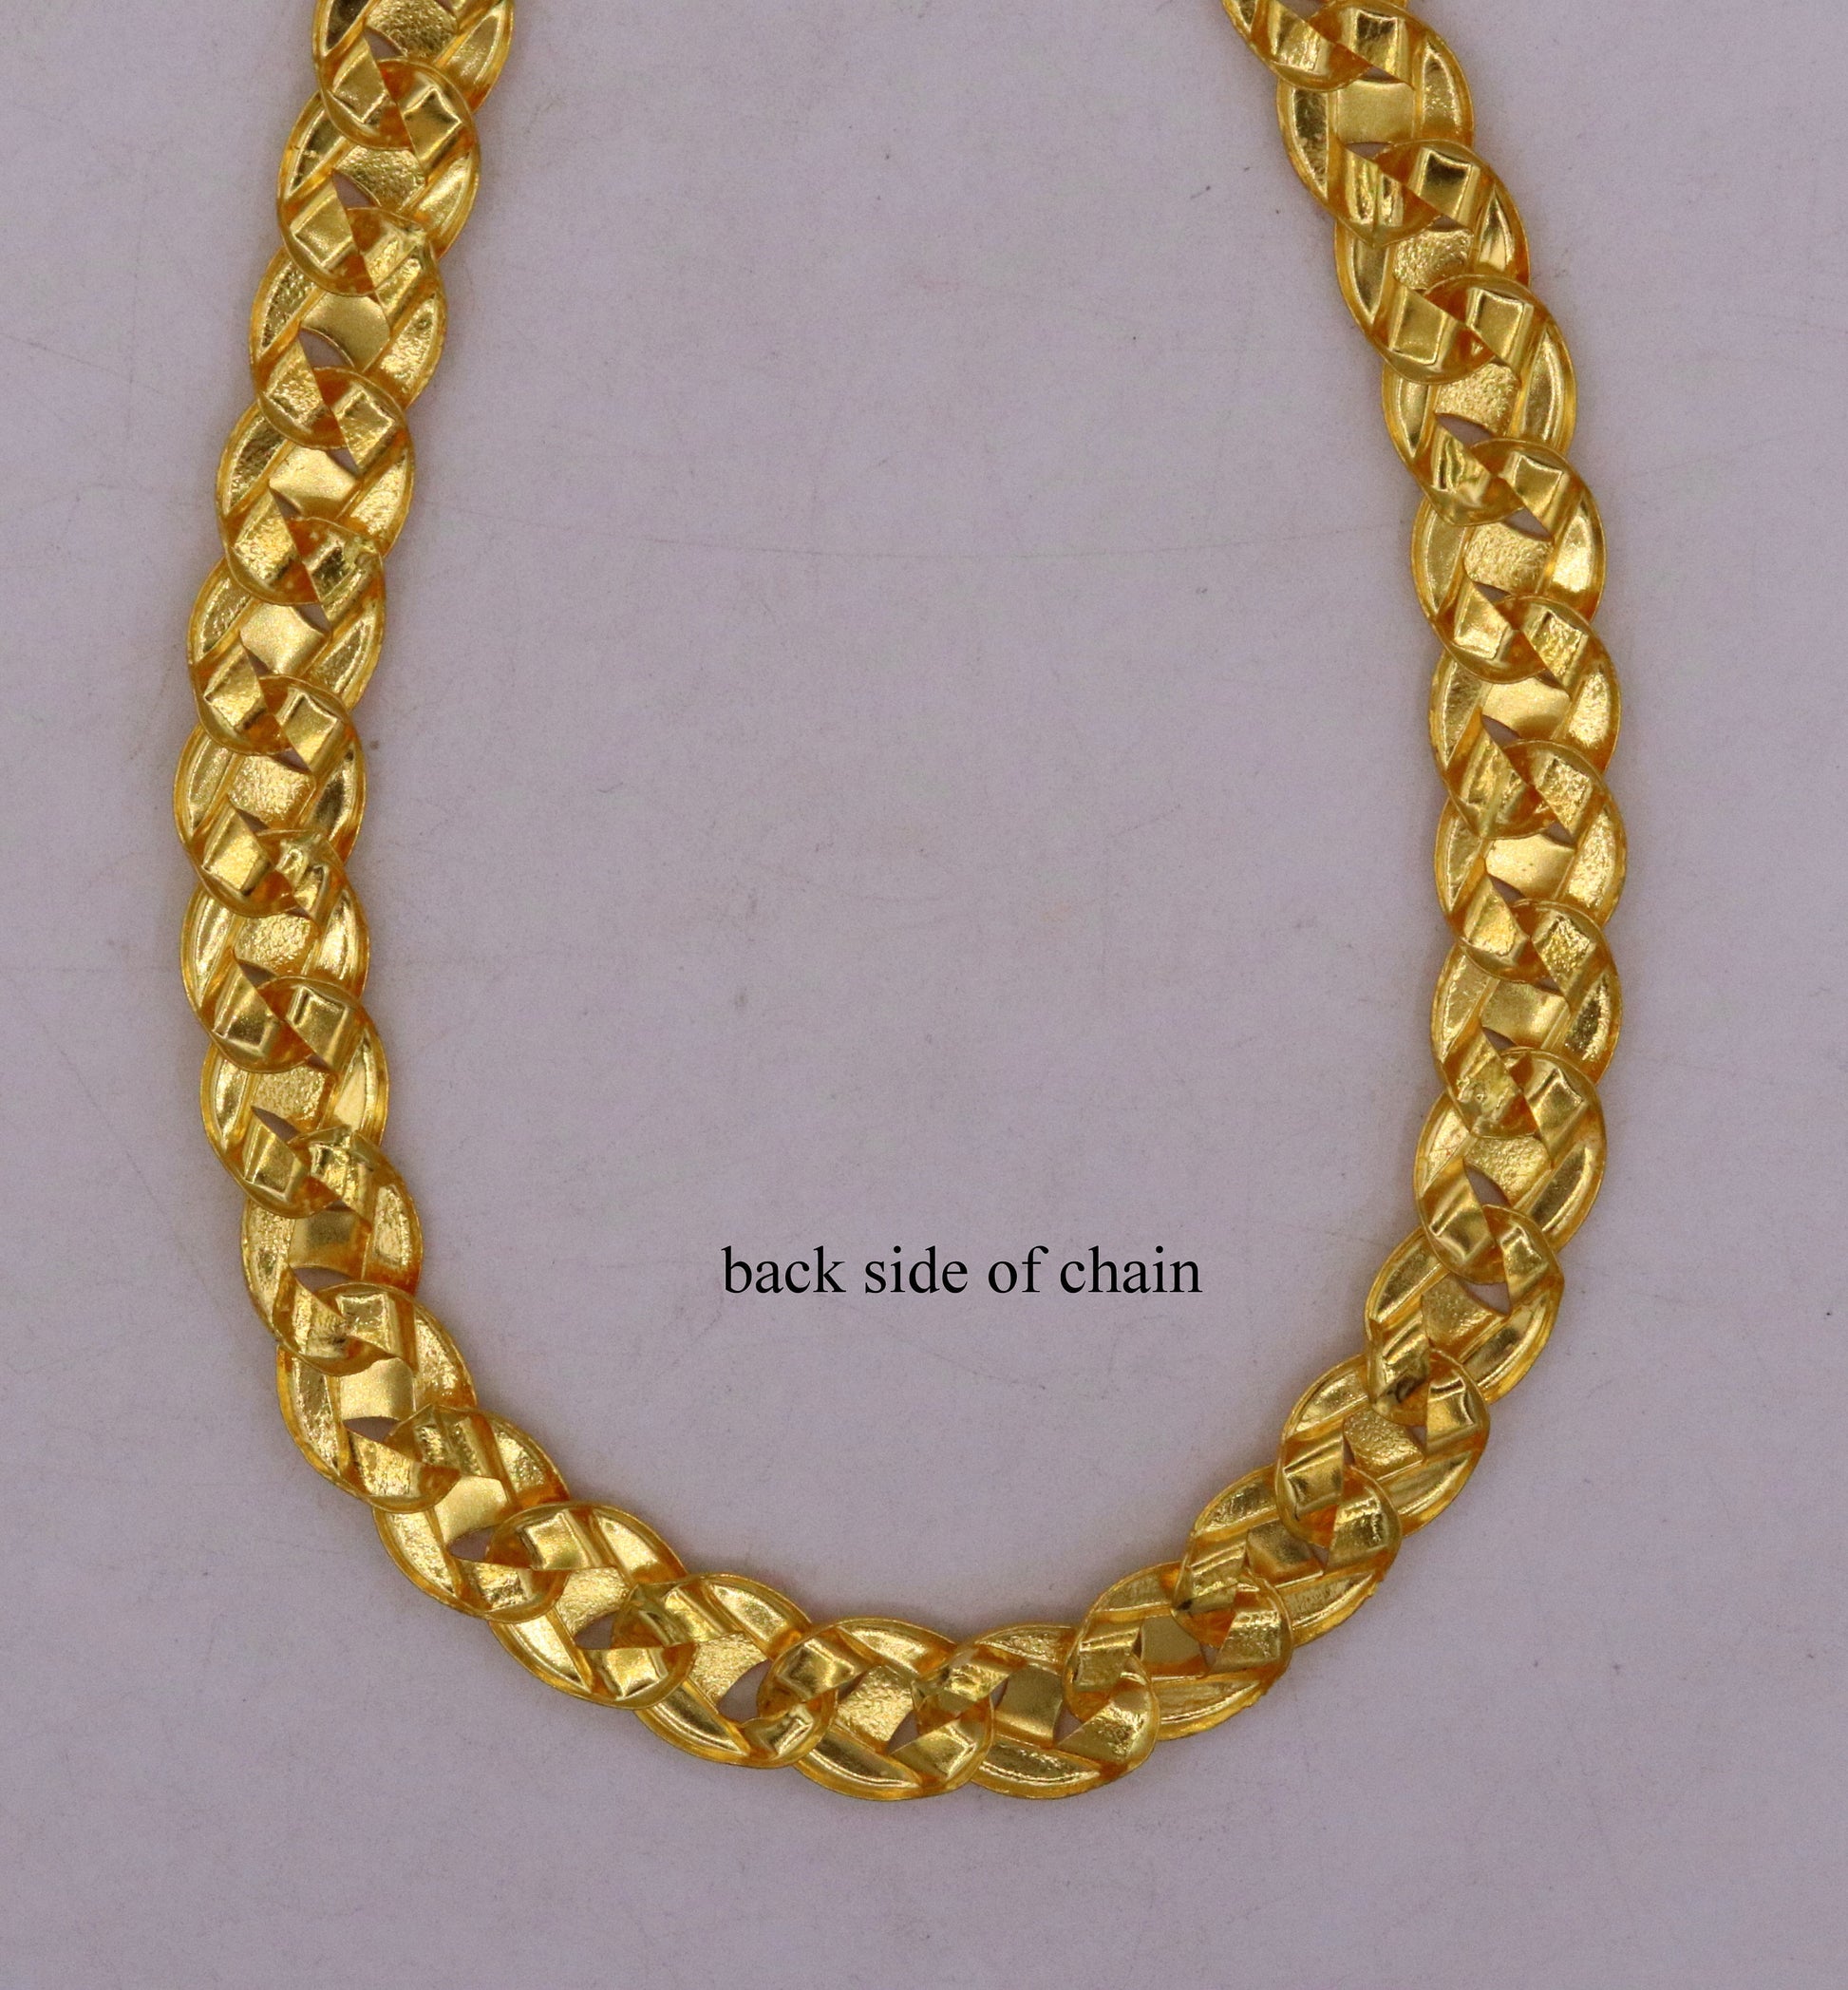 20 inches 22k yellow gold handmade fabulous hollow Link chain necklace excellent gifting jewelry unisex chain ch170 - TRIBAL ORNAMENTS